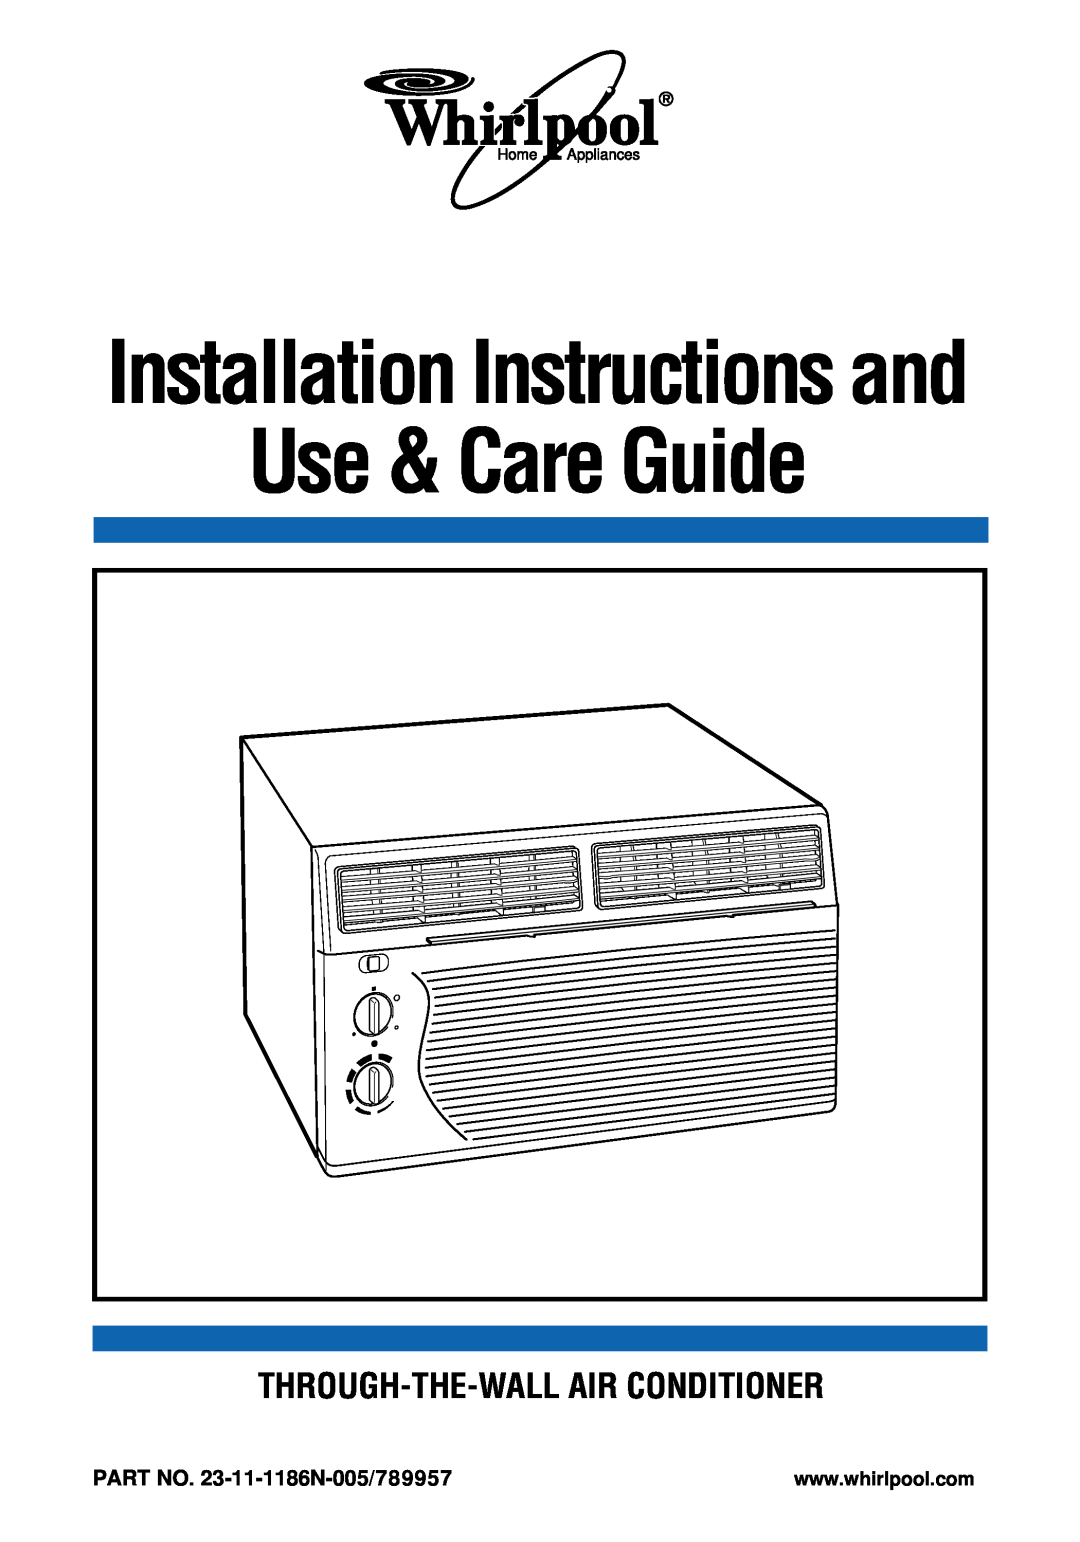 Whirlpool ACU124PK0 installation instructions Through-The-Wallair Conditioner, PART NO. 23-11-1186N-005/789957 